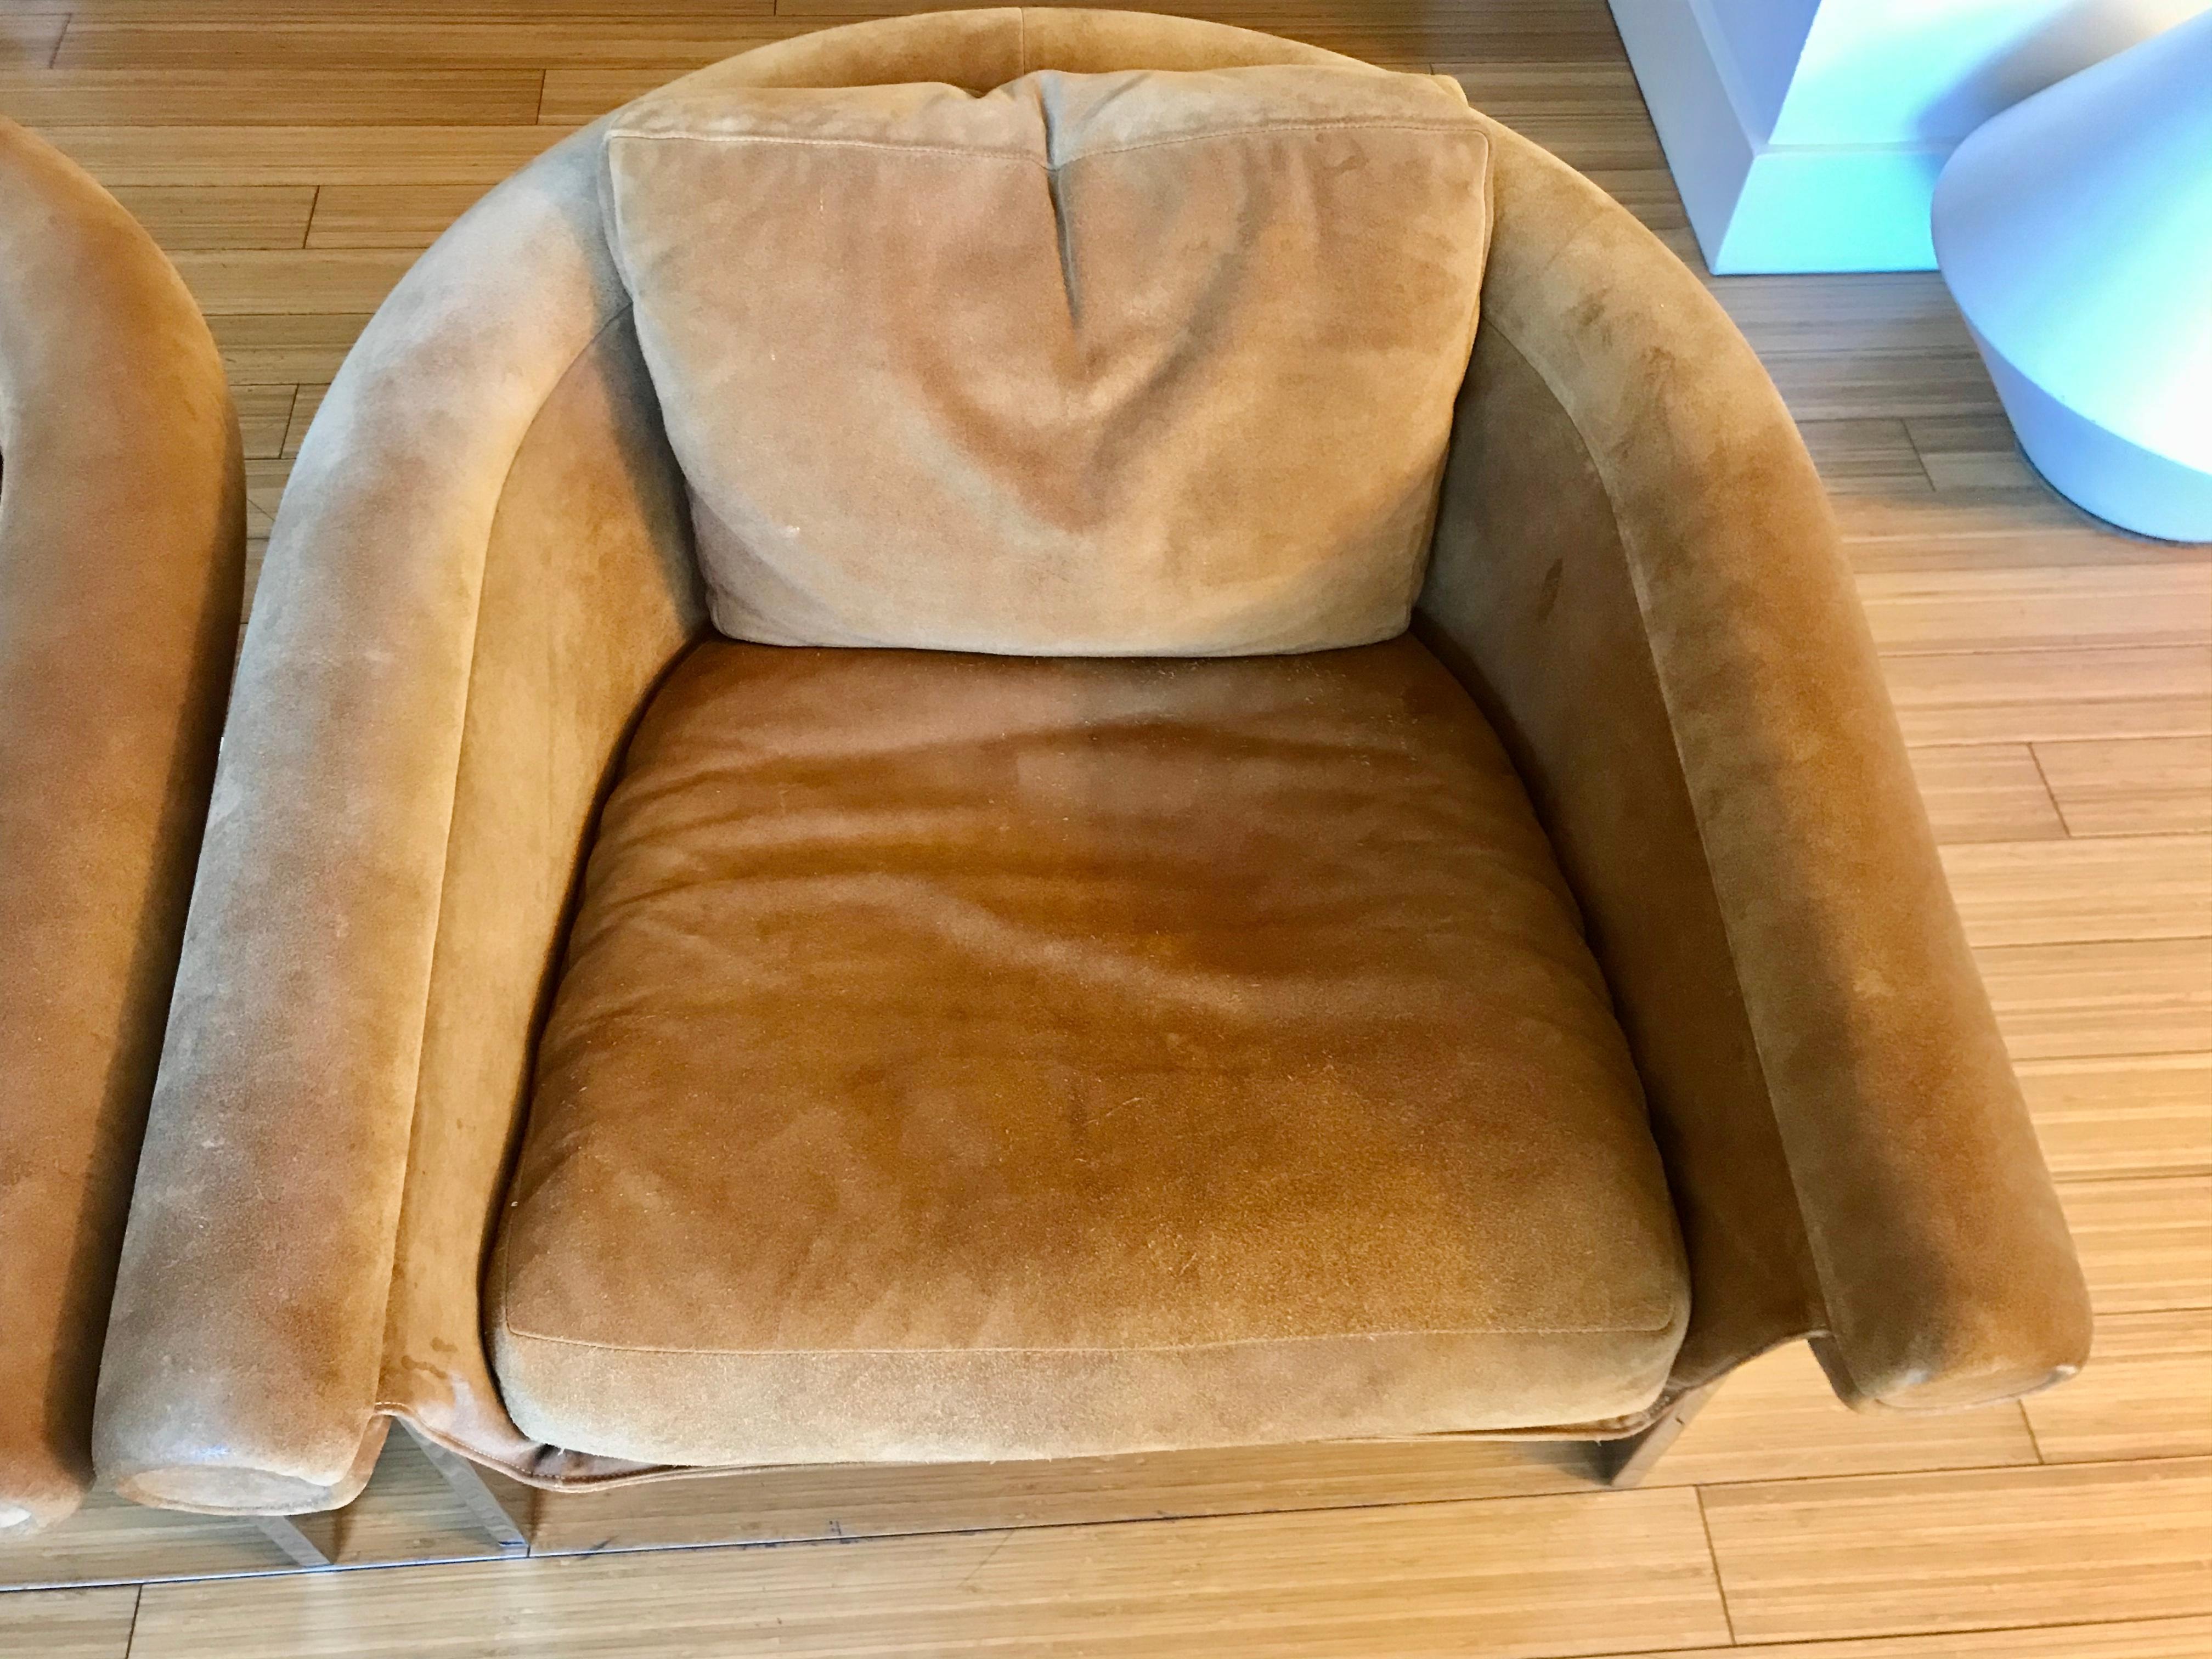 Steel Pair of Suede Sling Lounge Chairs with Sheep Skin Covers